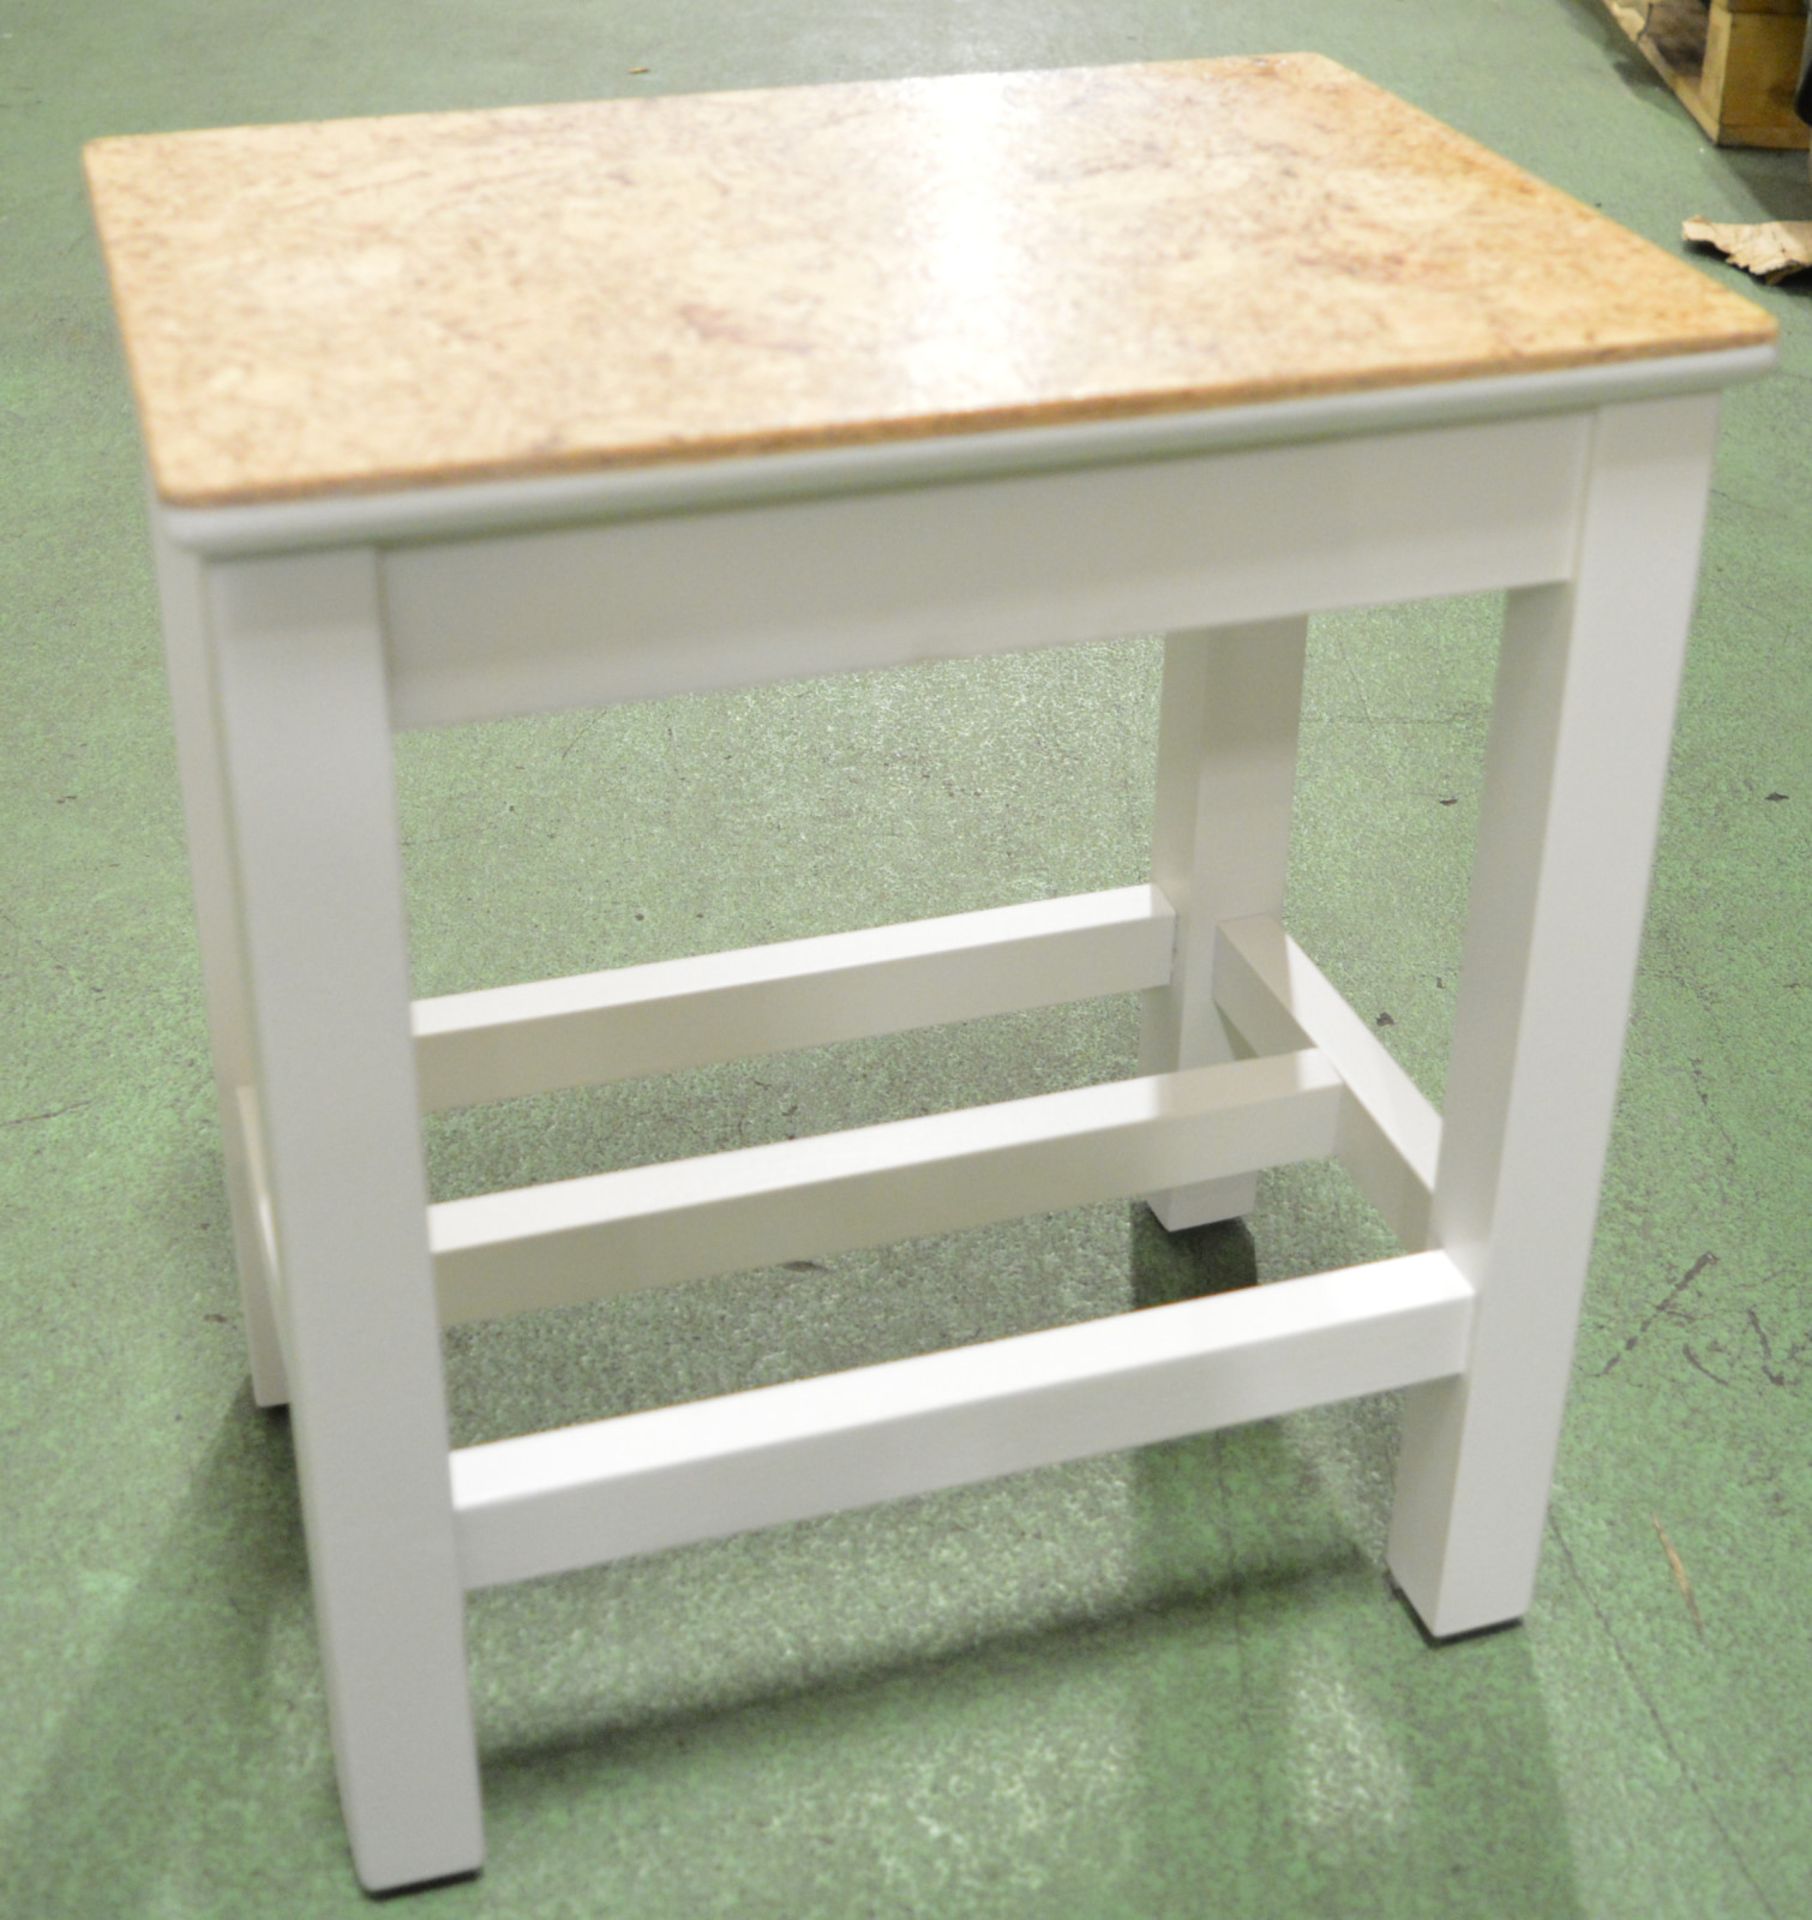 2x Bathroom Stools - White Painted Legs with Cork Seat - Brand new in box. - Image 2 of 2